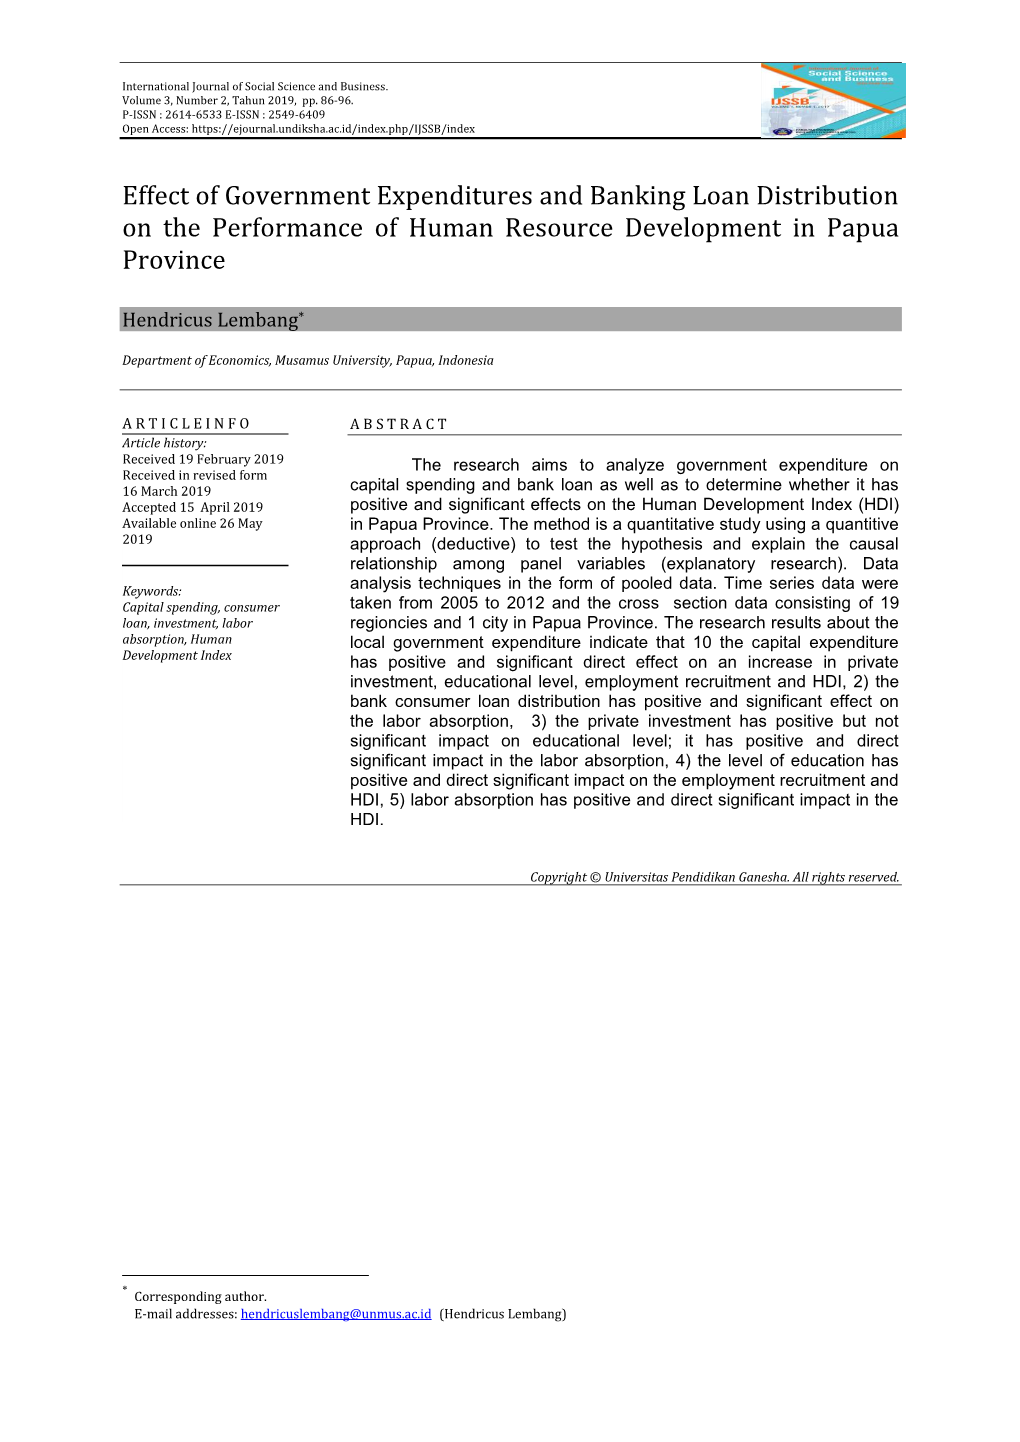 Effect of Government Expenditures and Banking Loan Distribution on the Performance of Human Resource Development in Papua Province